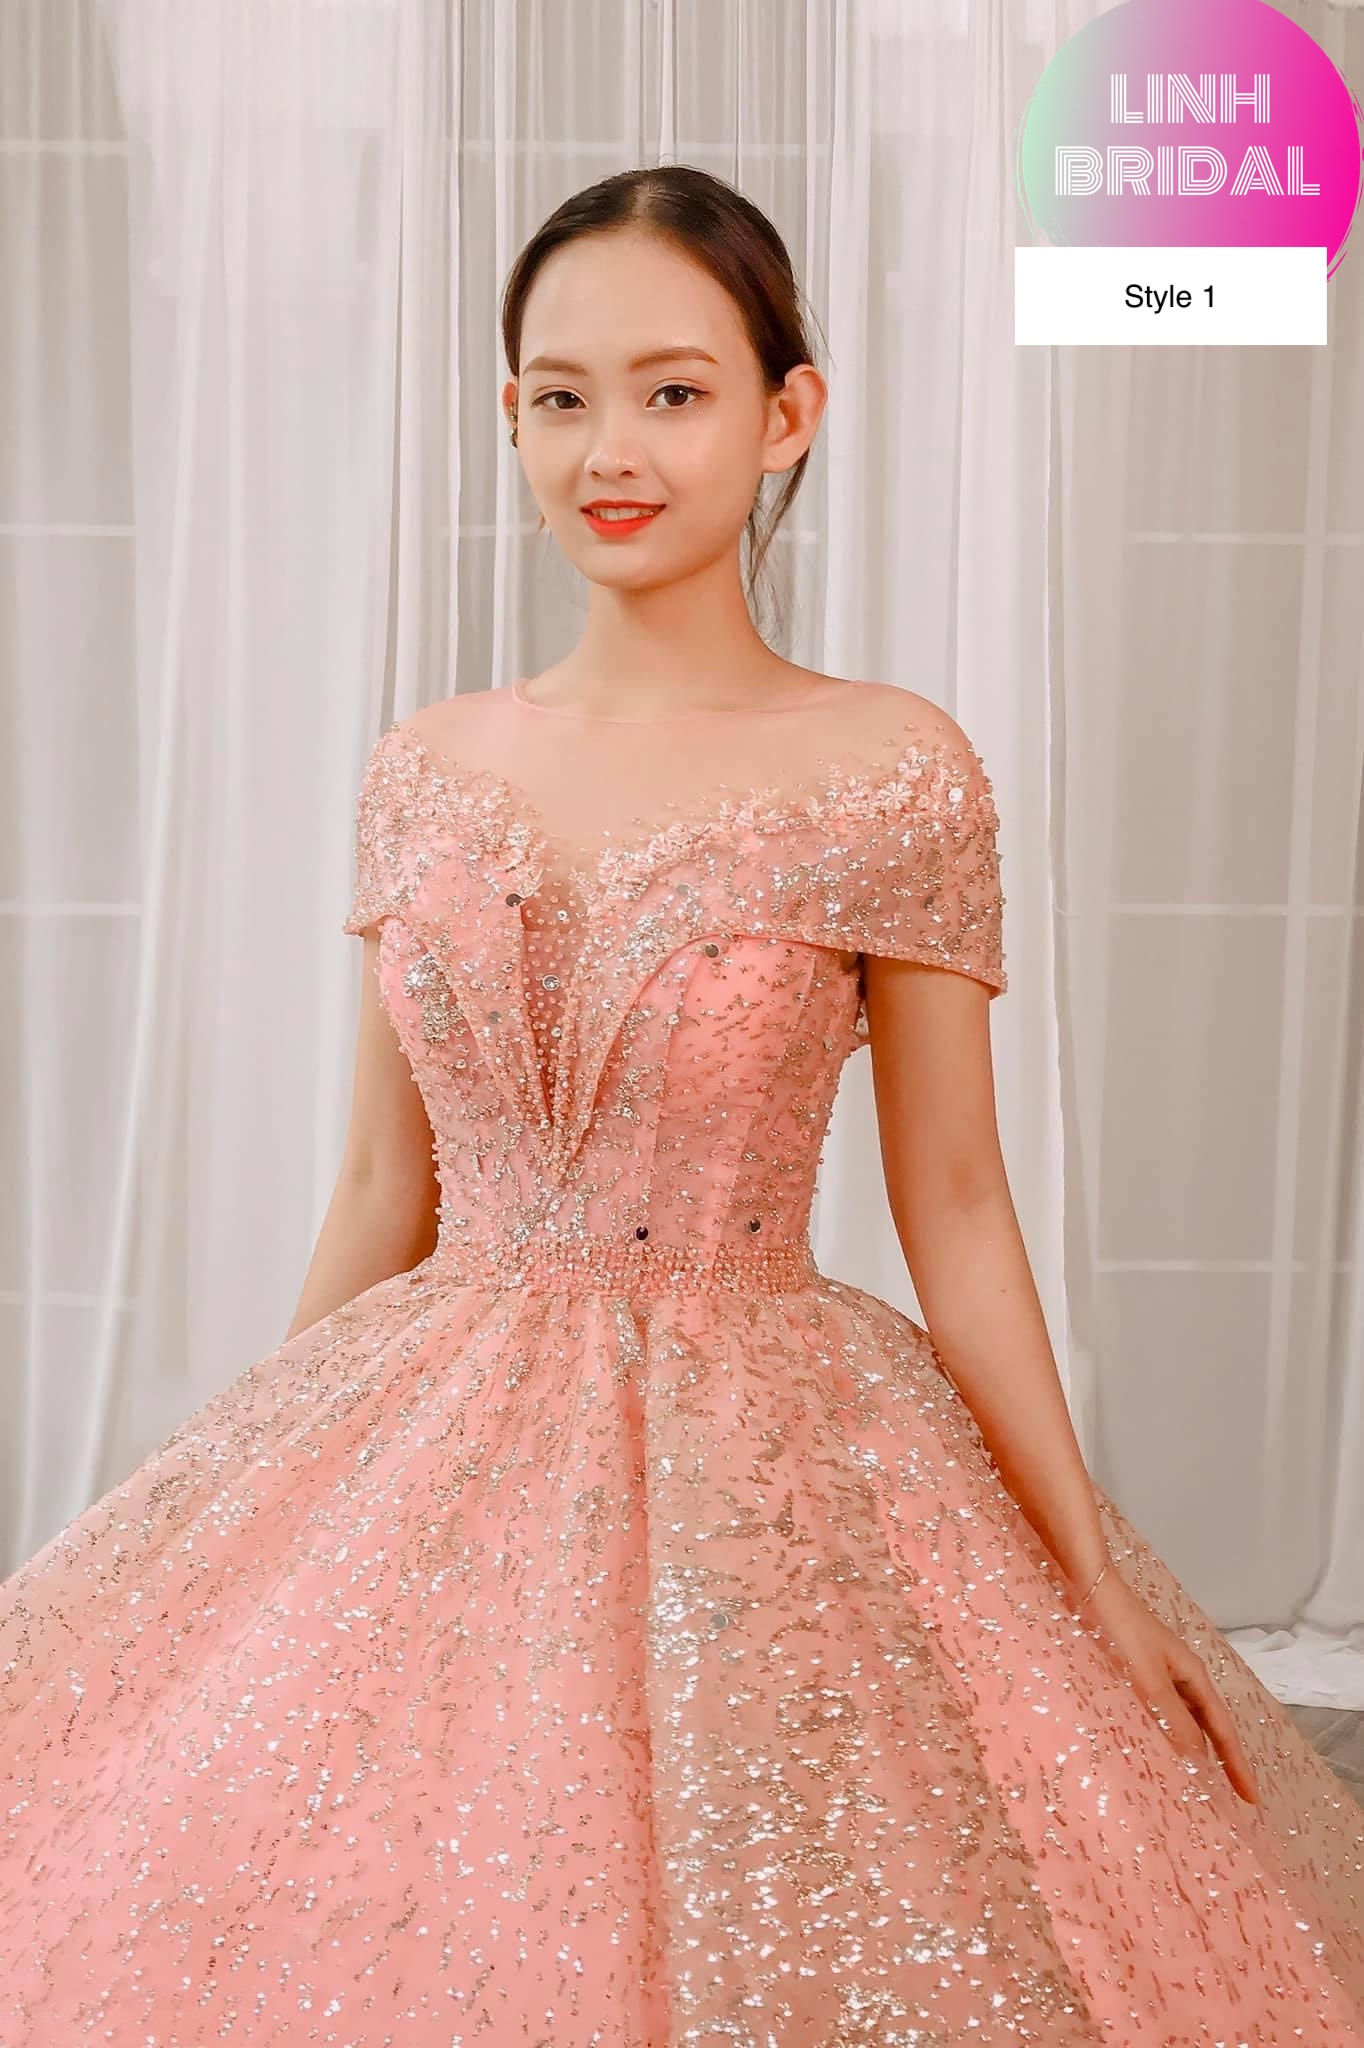 Candy pink/rose gold sparkly ball gown wedding/prom dress